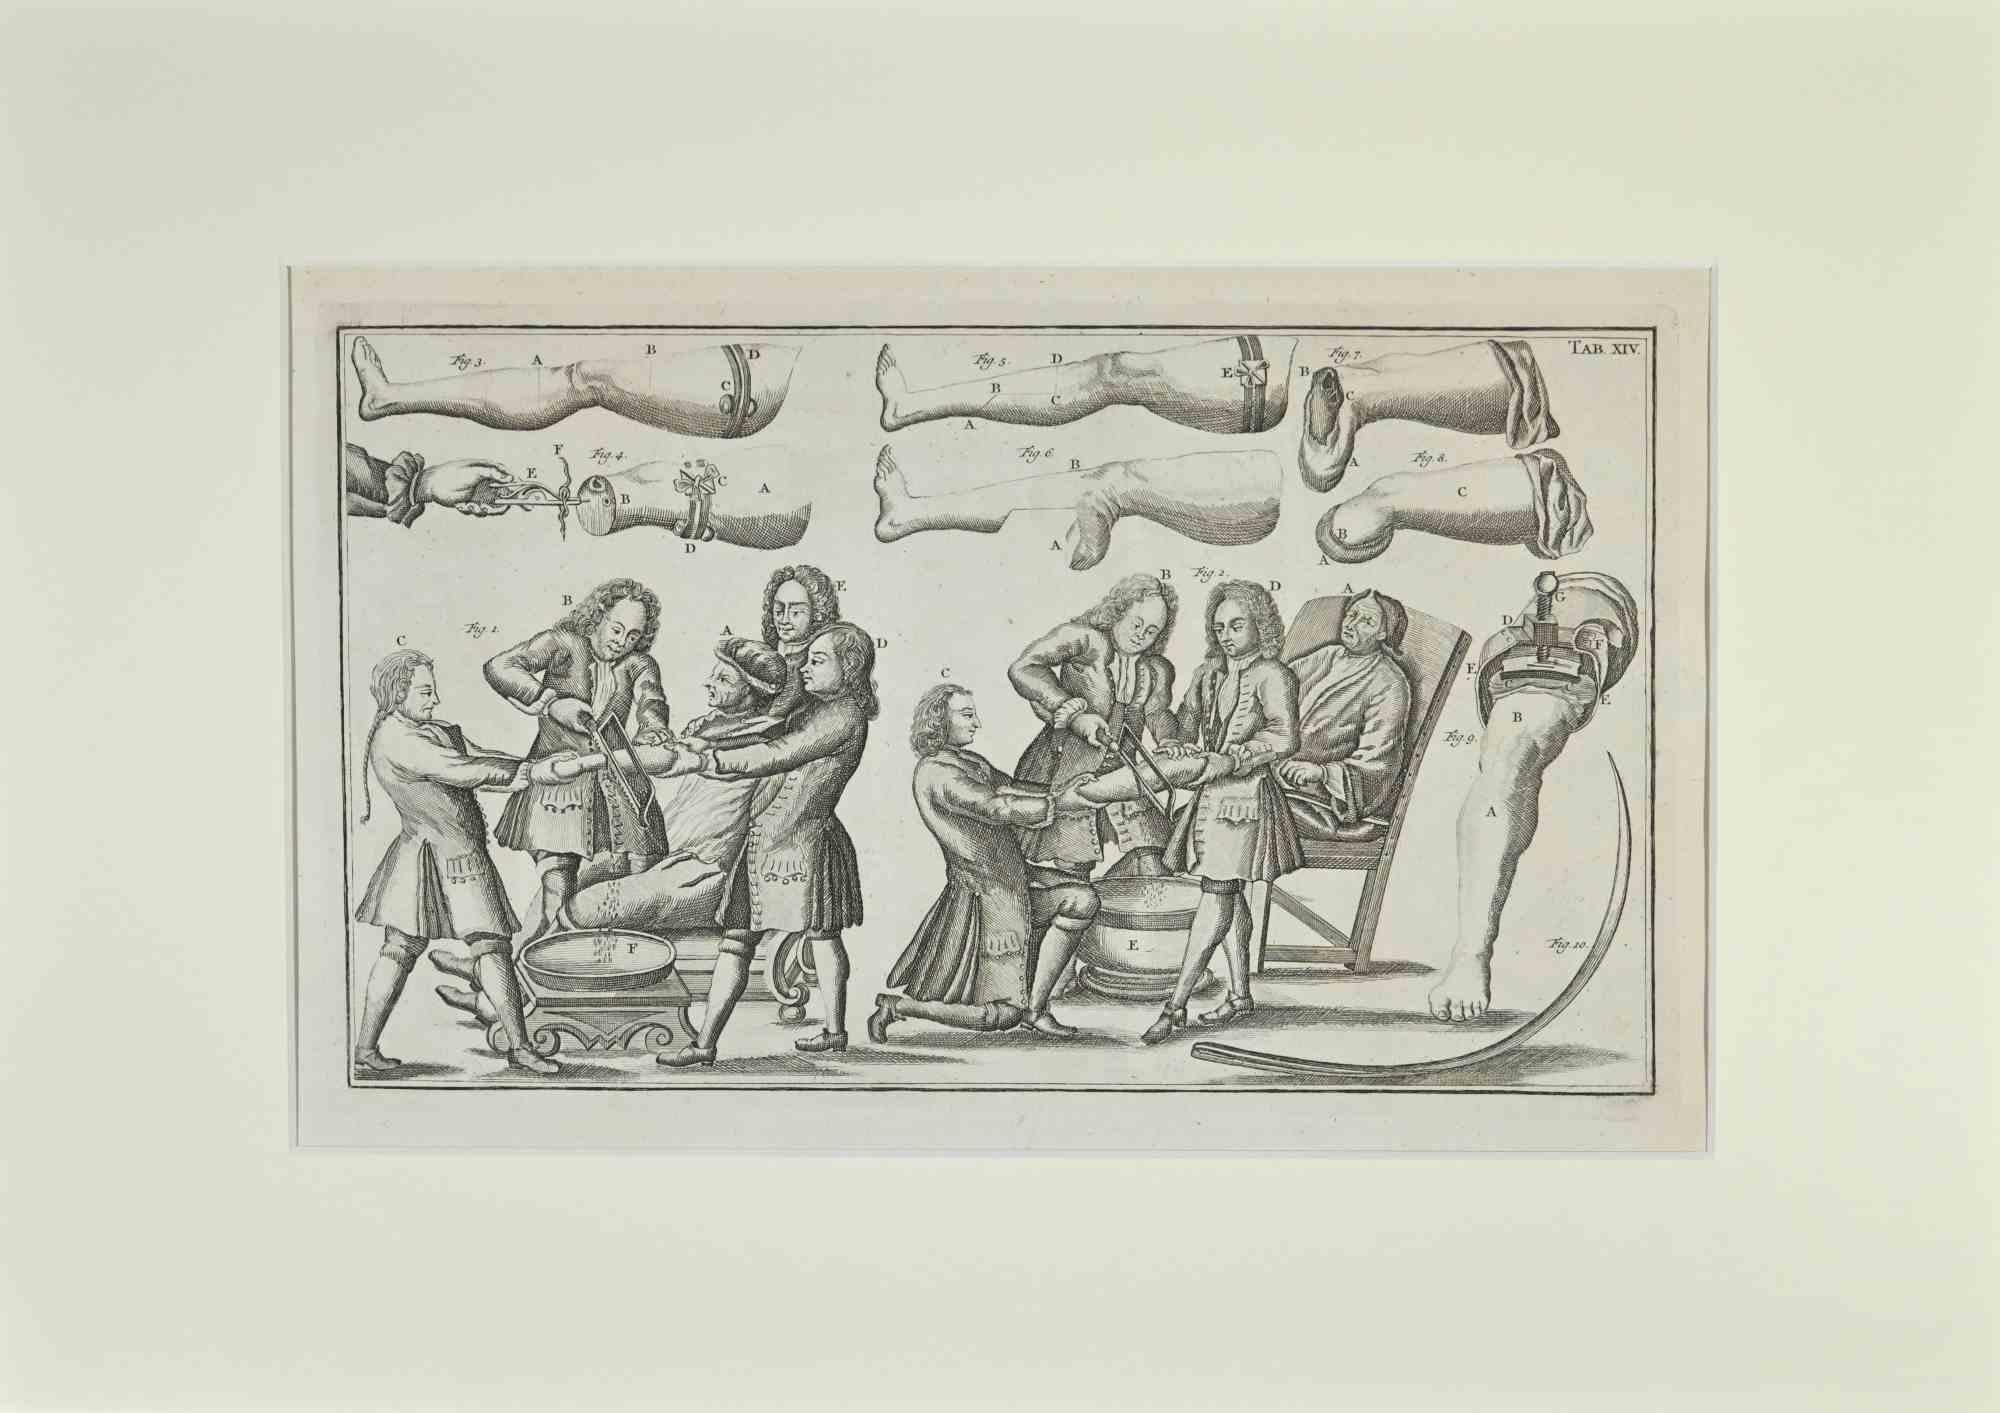 Surgical Treatments is part of the suite realized by Lorenz Heister in the series of Institutiones Chirurgicae, Amsterdam, Janssonius-Waesberg, 1750.

Etching on paper.

The work belongs to the Latin edition of the famous work by the founder of